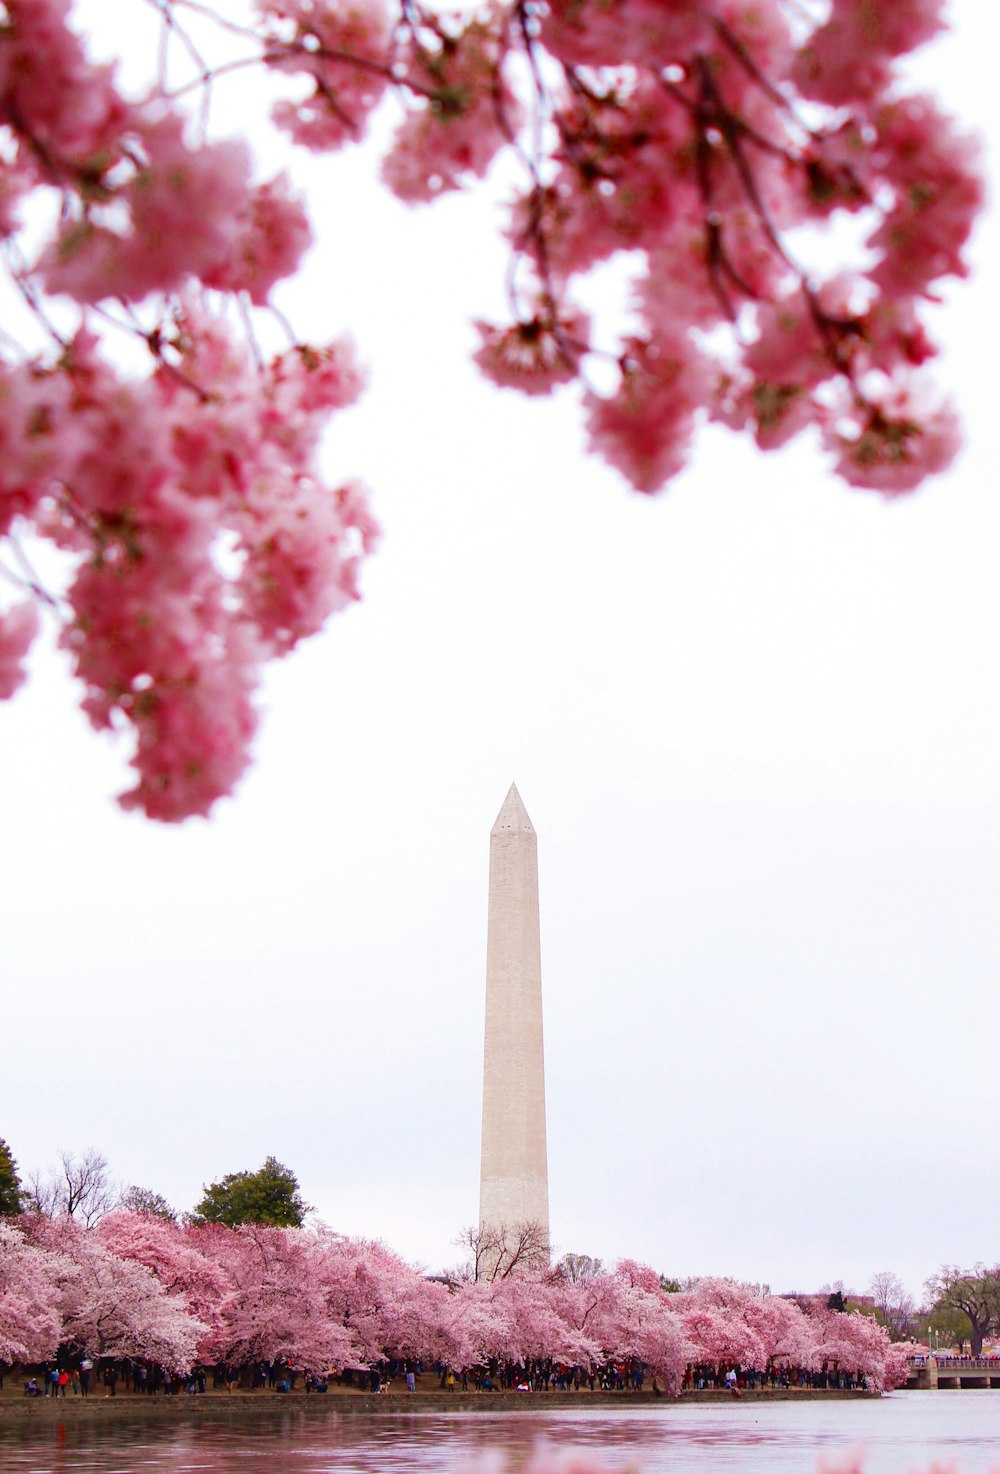 the washington monument is surrounded by cherry blossoms